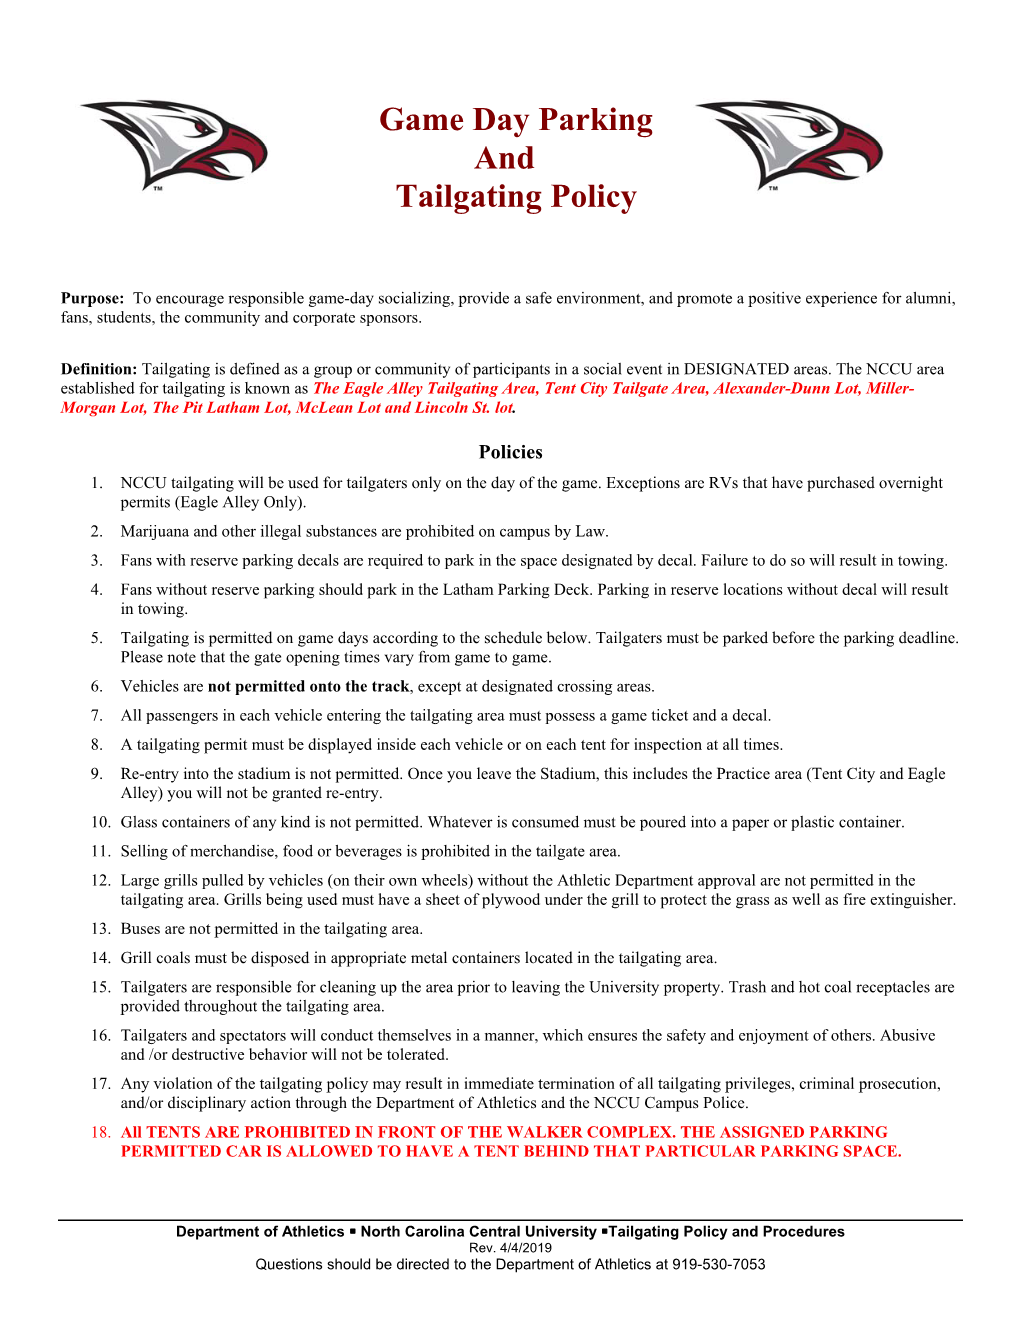 Game Day Parking and Tailgating Policy